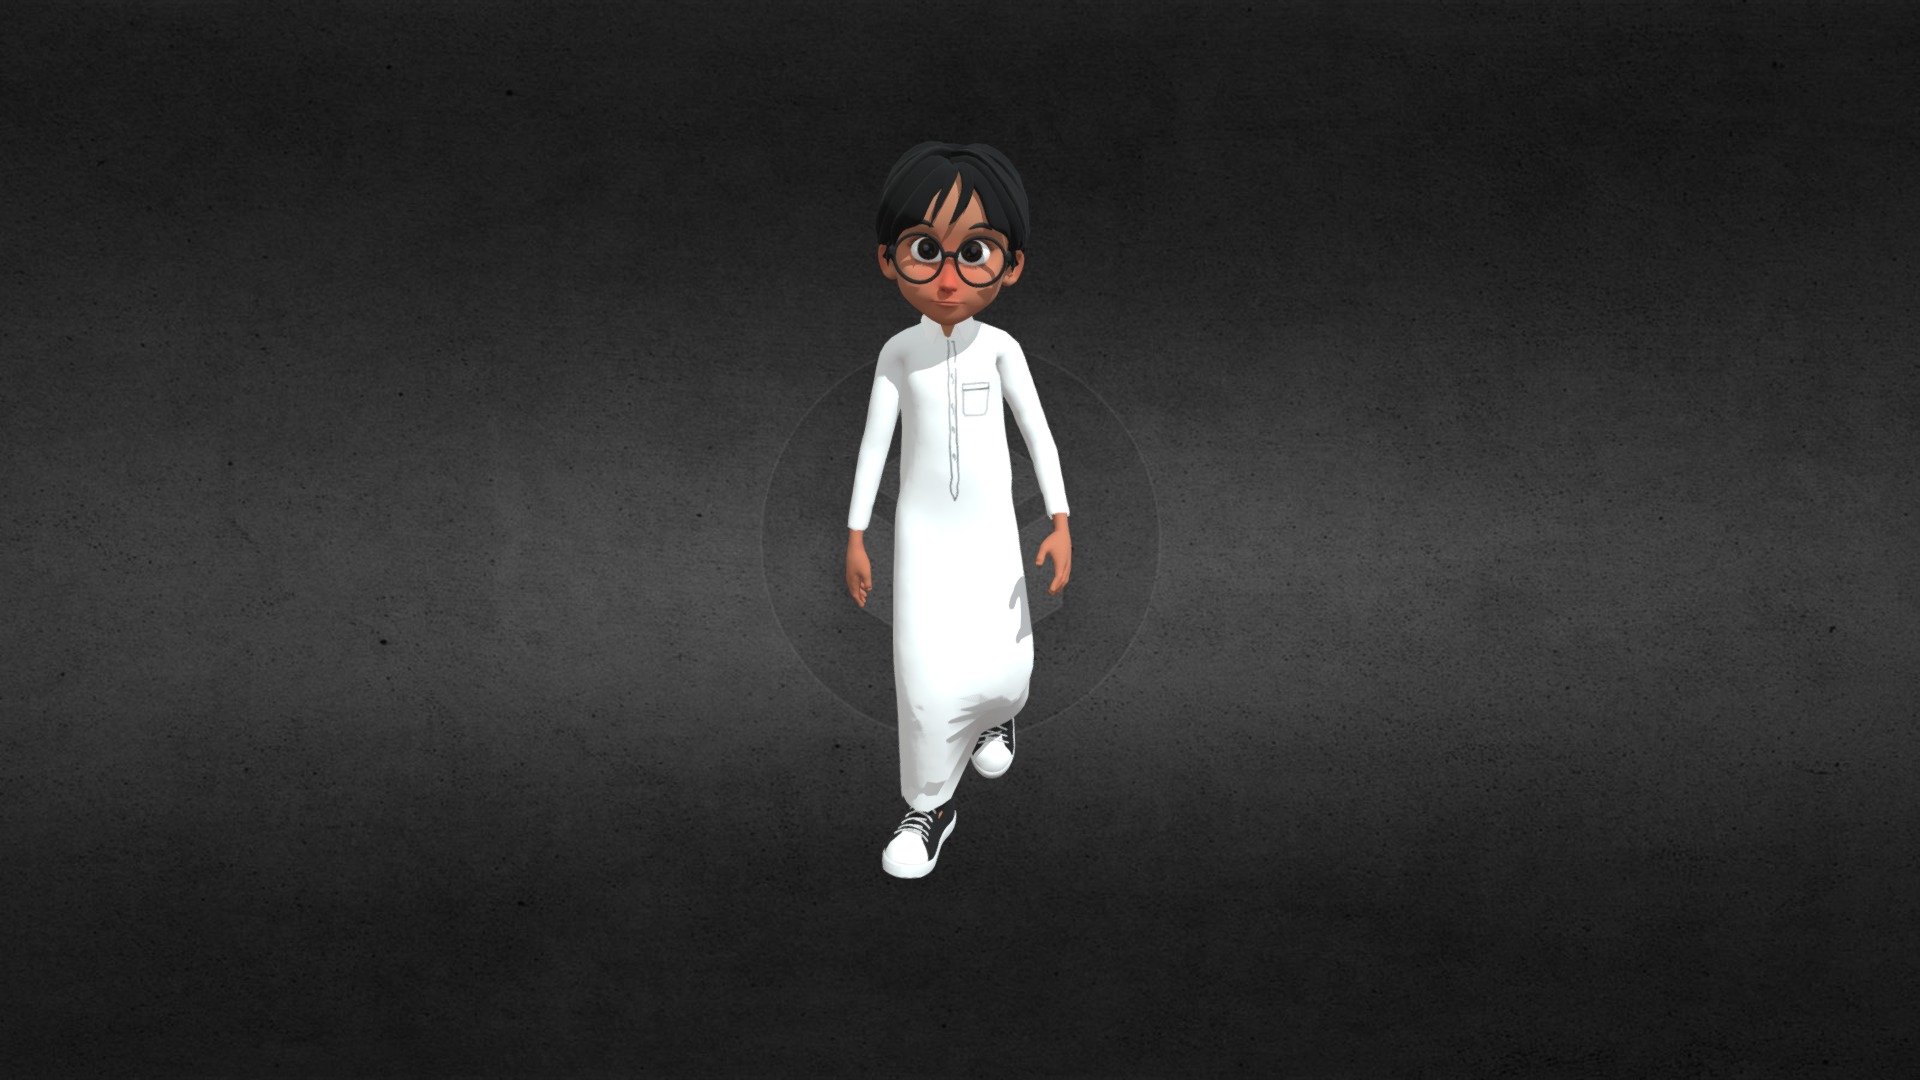 An Arab child from the Gulf with all his bones and movement. You can also use it in any 3D programs as well as game programs such as Unreal Engine very suitable, you may need to adjust the transparency of the body under the clothes if you need a smoother file, and there is a file for textures and there is FBX - OBJ - do not hesitate Email me if you have any comments or interest in other models (sums12@hotmail.com) - Arab child - 3D model by sMs (@sultanalsubiei) 3d model